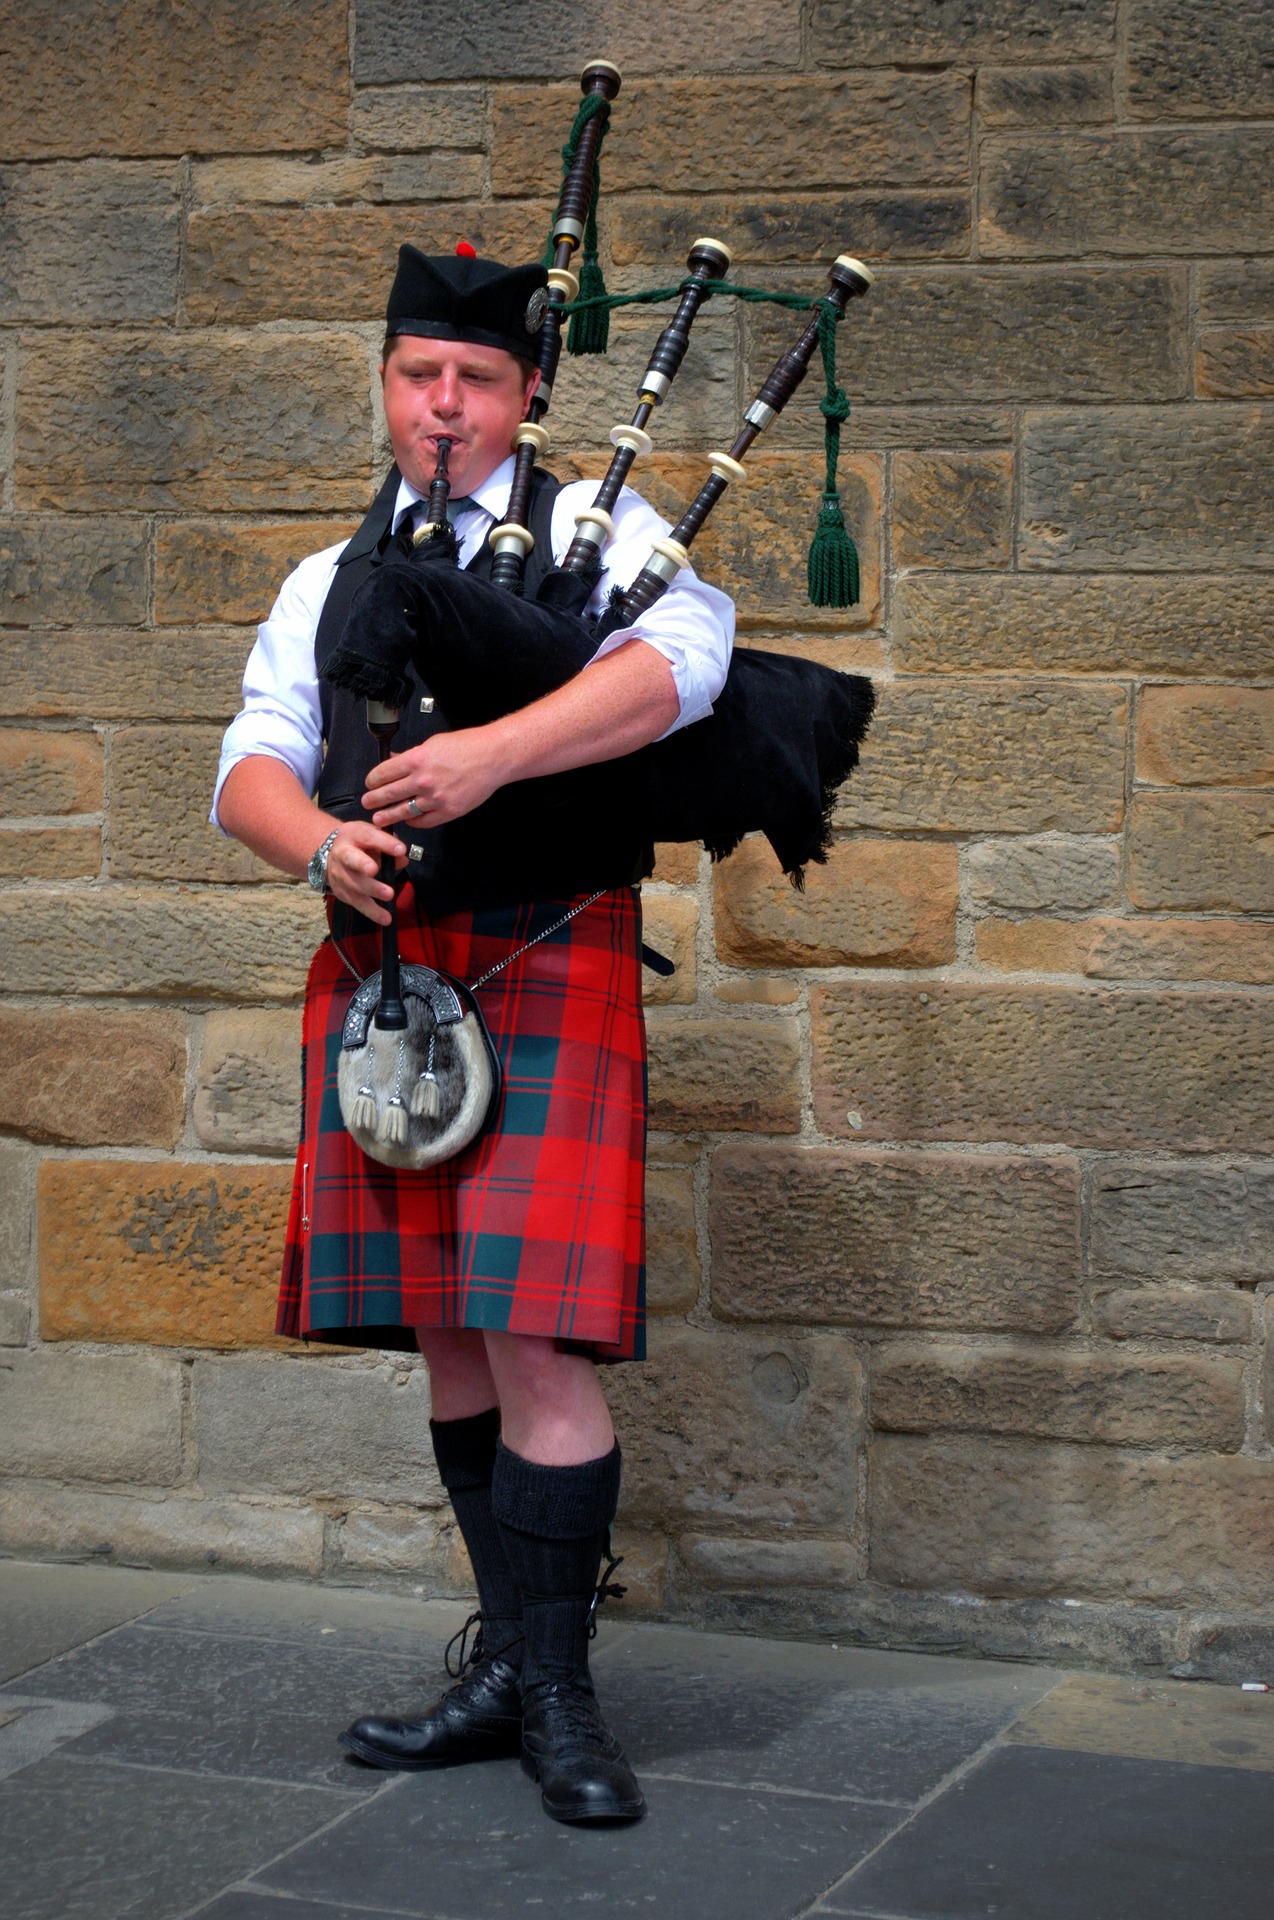 A man playing bagpipes